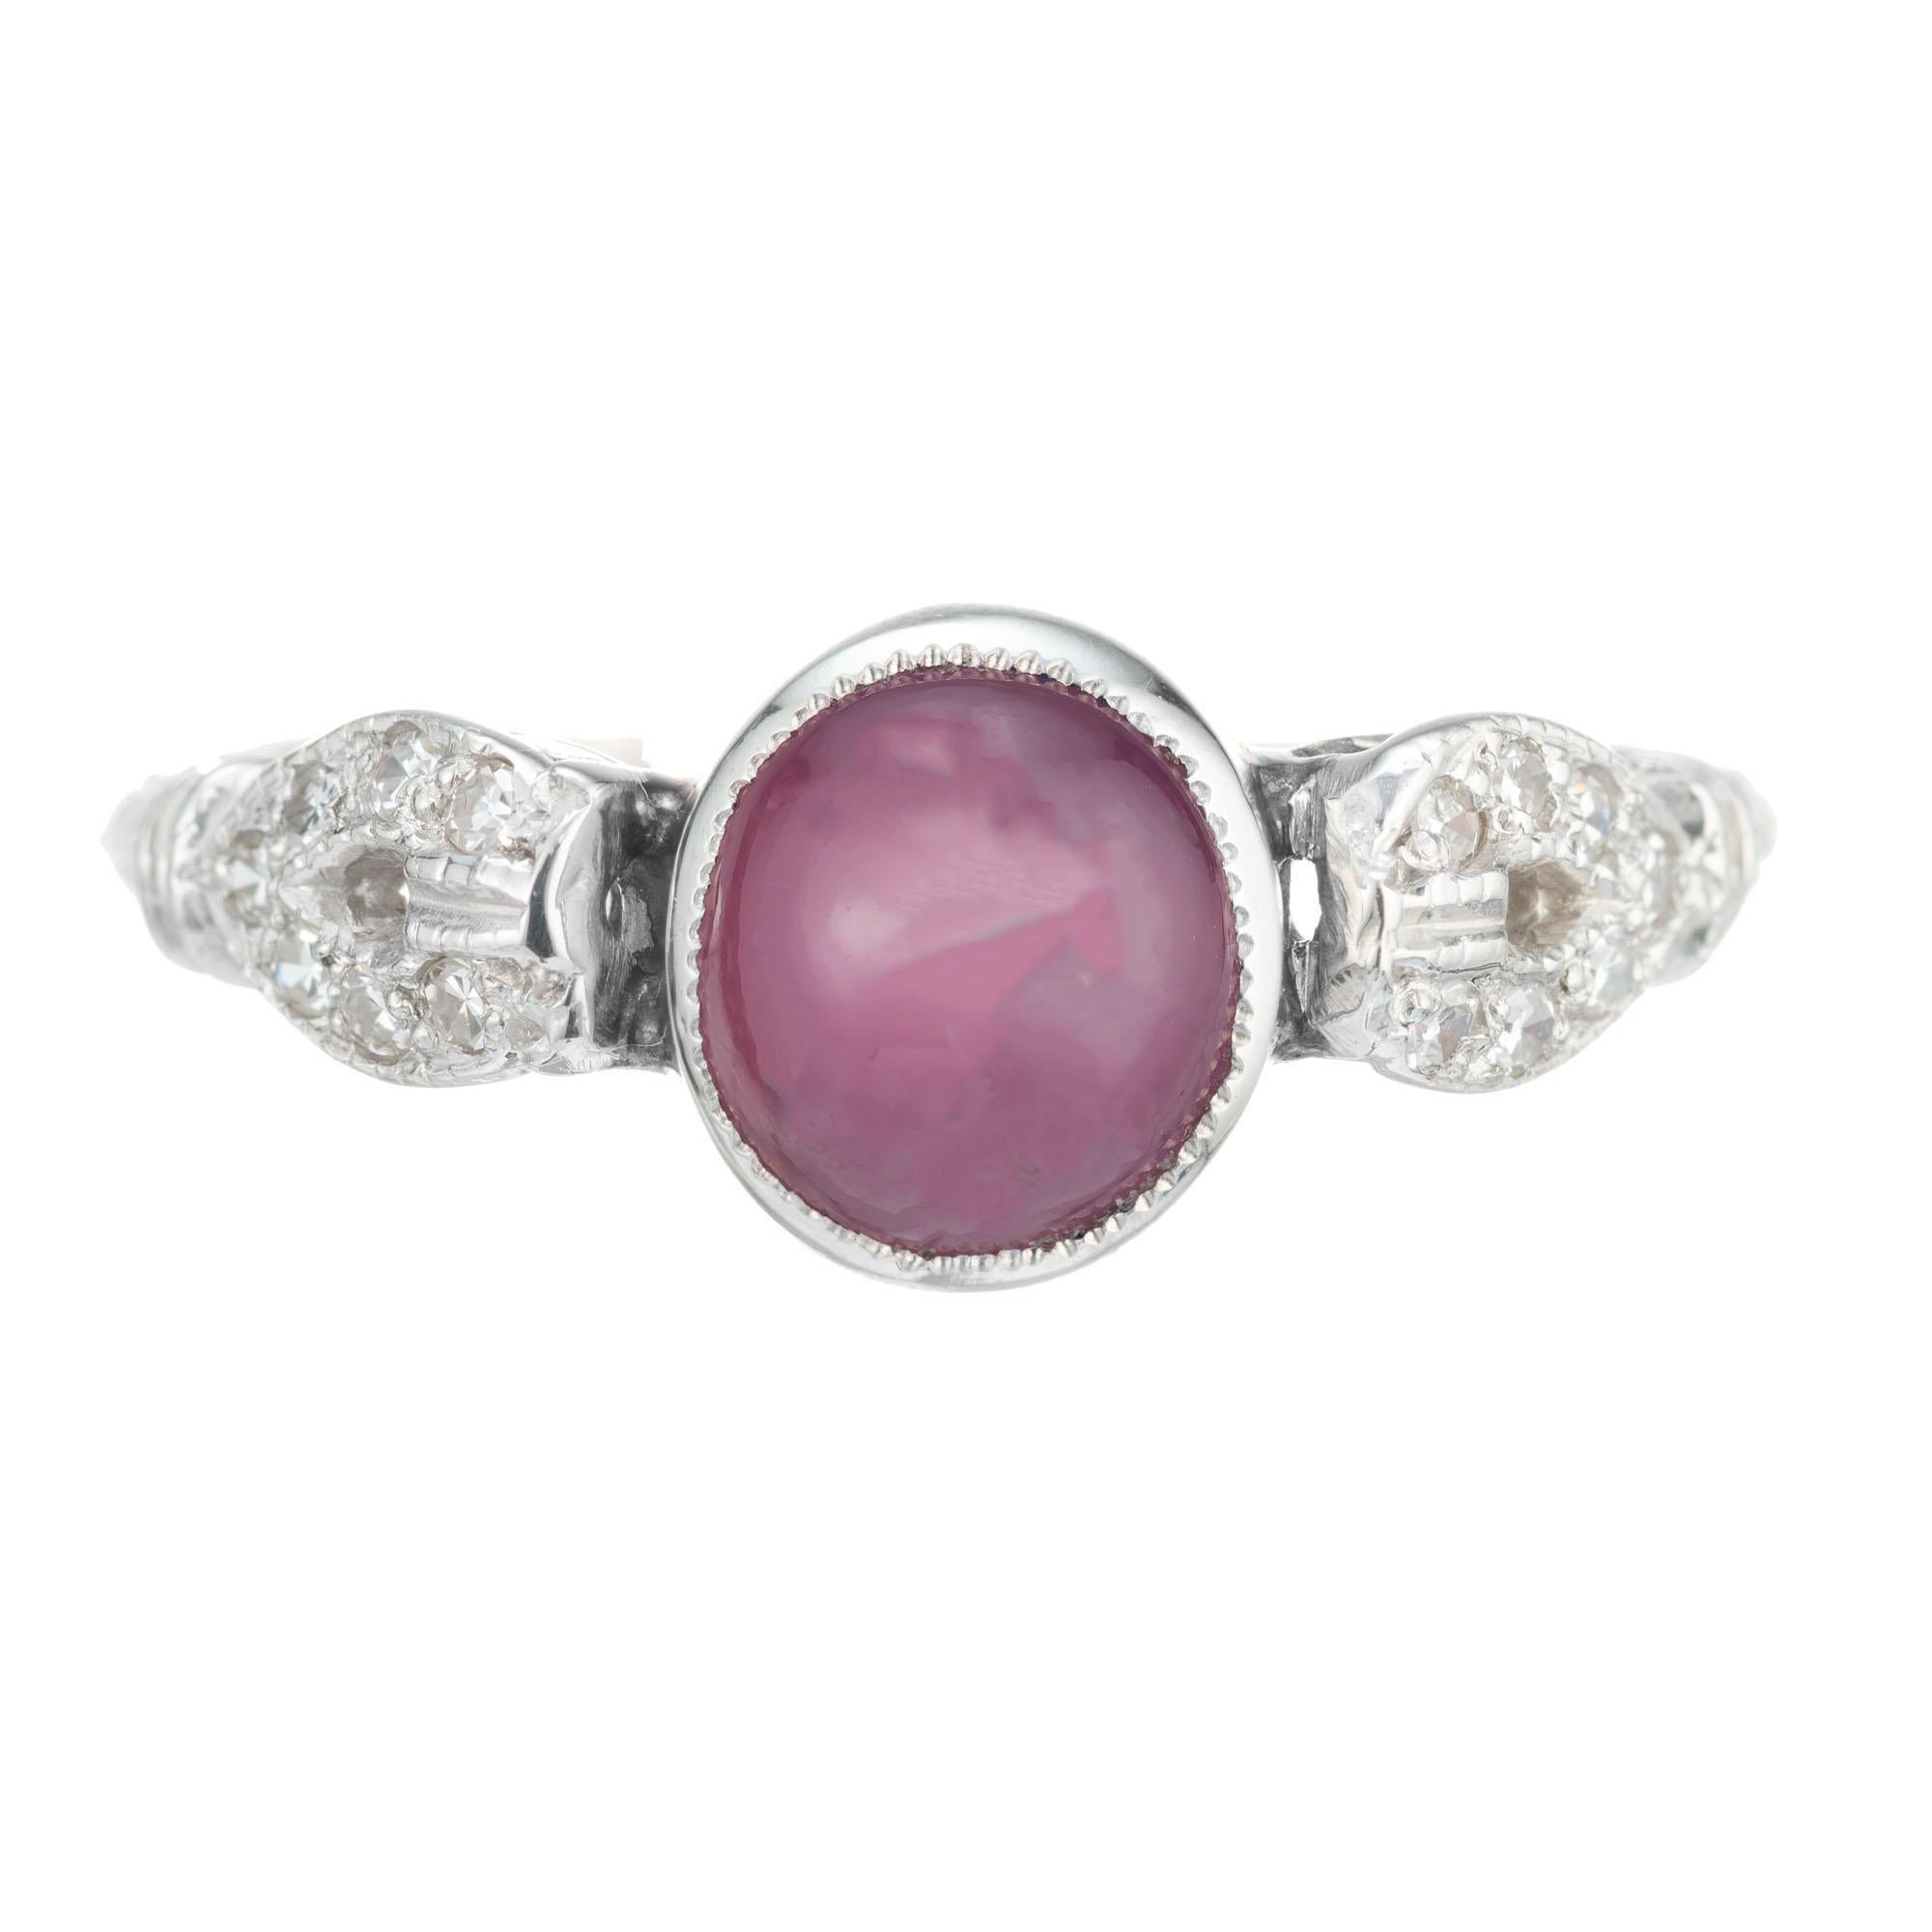 Star Ruby and diamond 1920's Art Deco engagement ring. GIA certified no heat cabochon star ruby bezel set center stone with 14 round accent diamonds in a platinum setting. The star is not easily seen under natural lighting. 

1 round star ruby